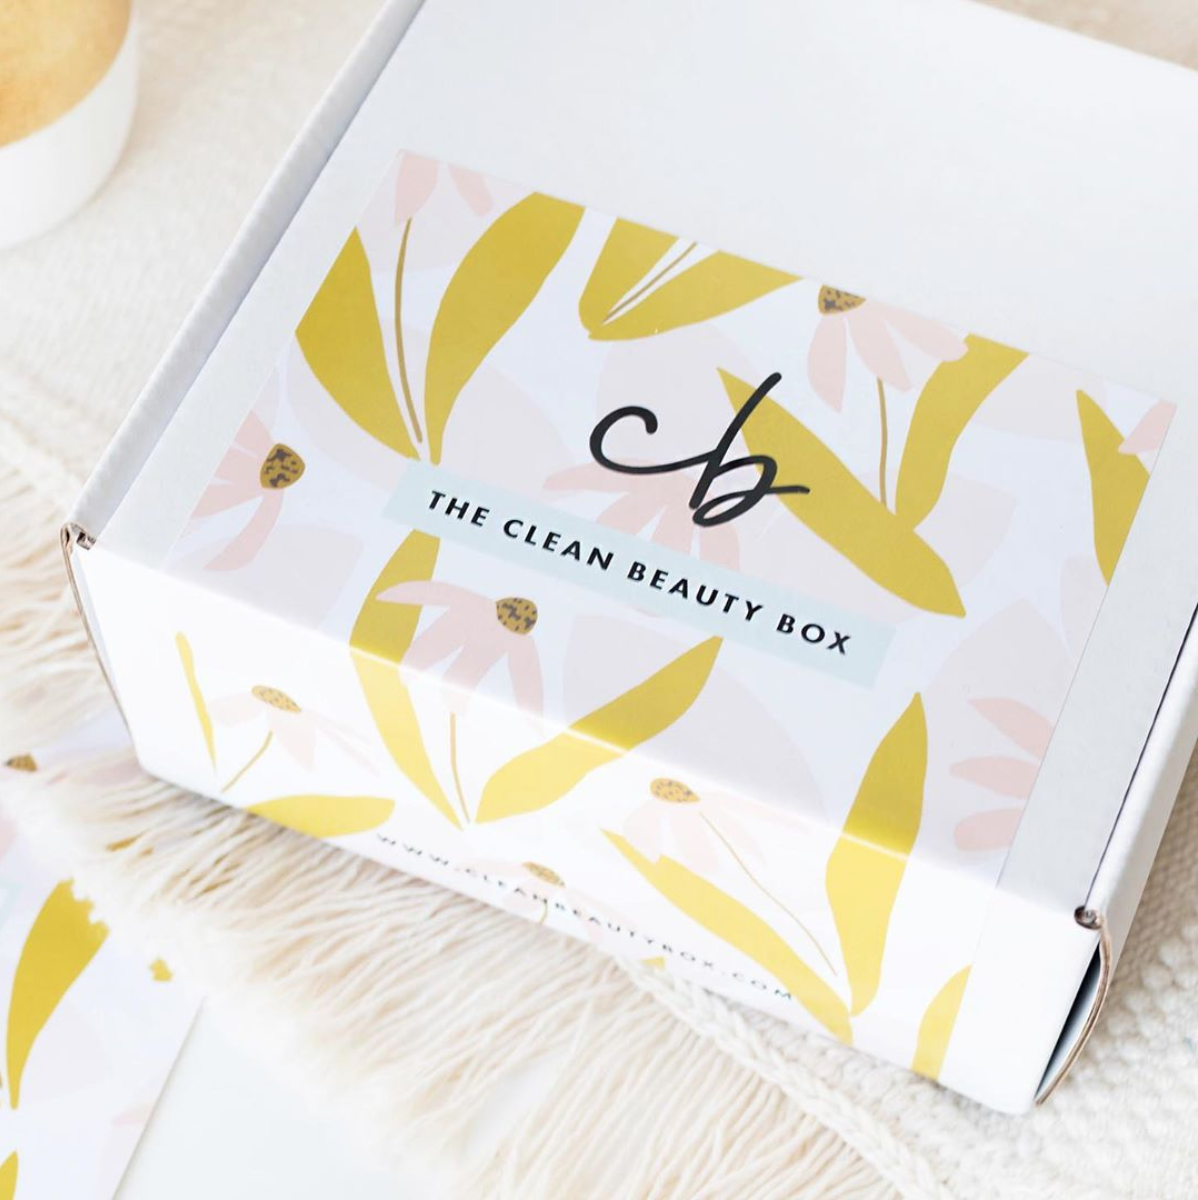 The Clean Beauty Box October 2019 Spoiler #1 + Coupon!